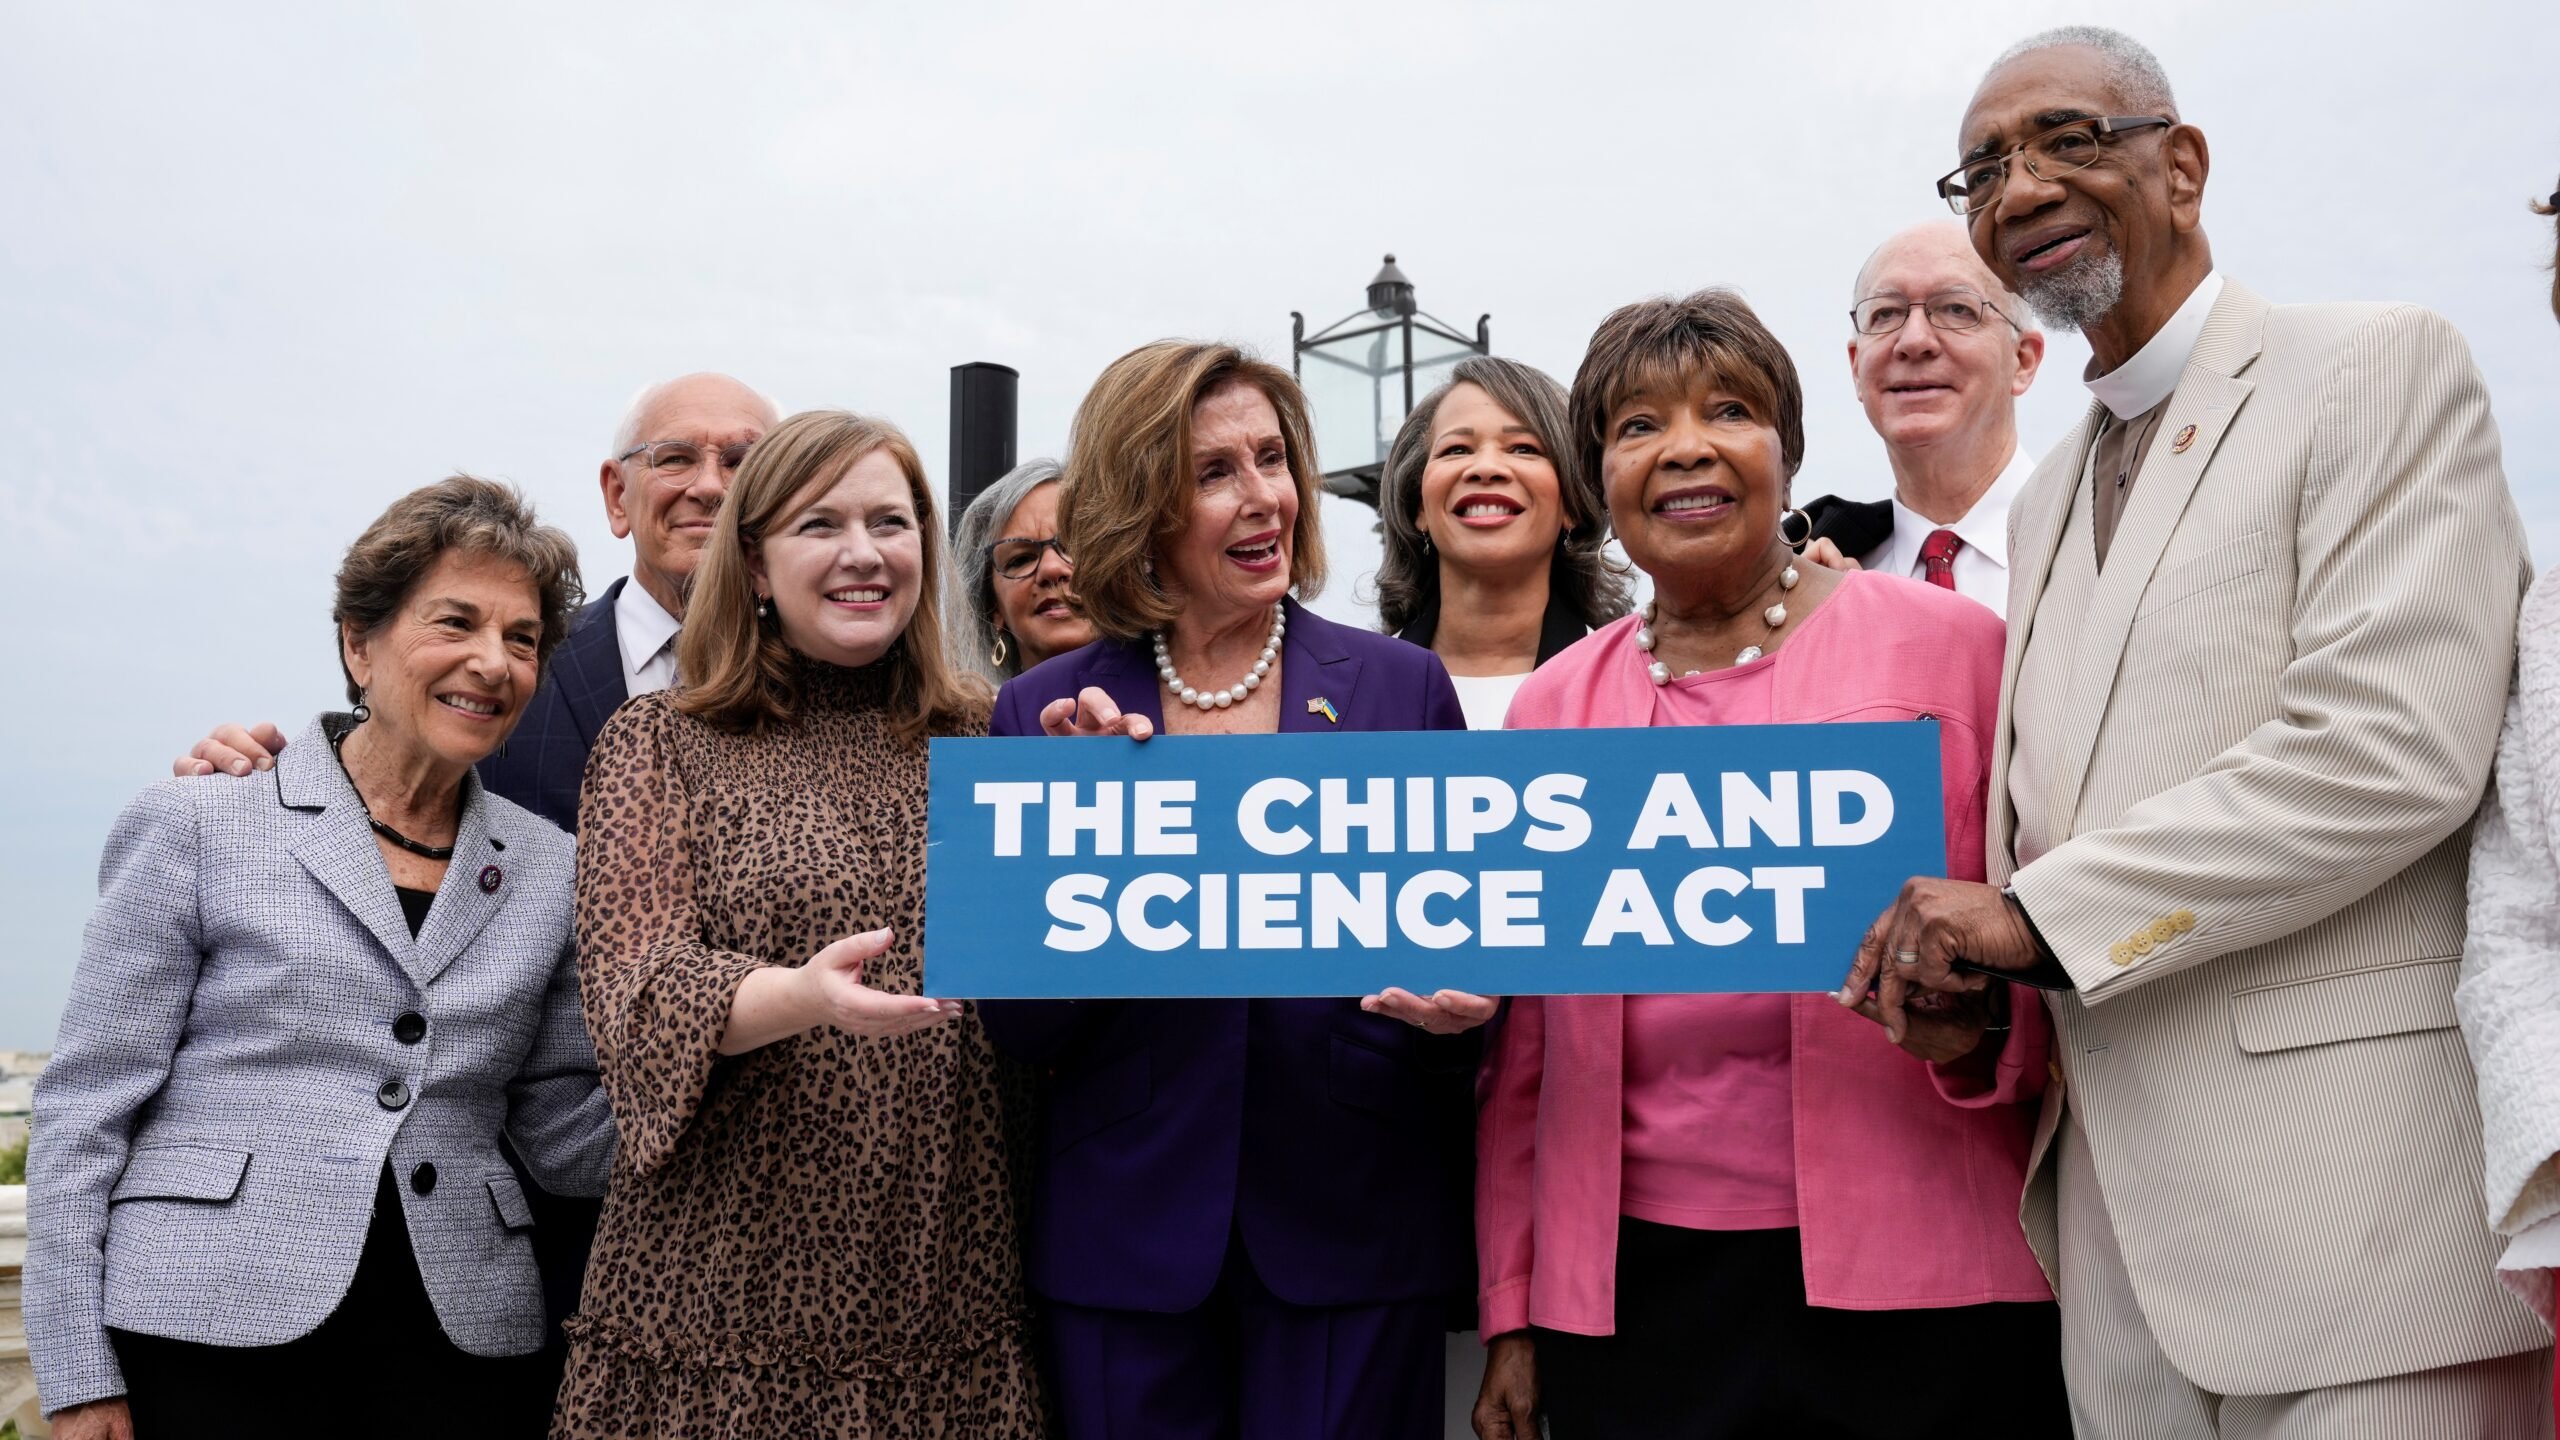 The CHIPS Act has passed. Now comes the hard work.